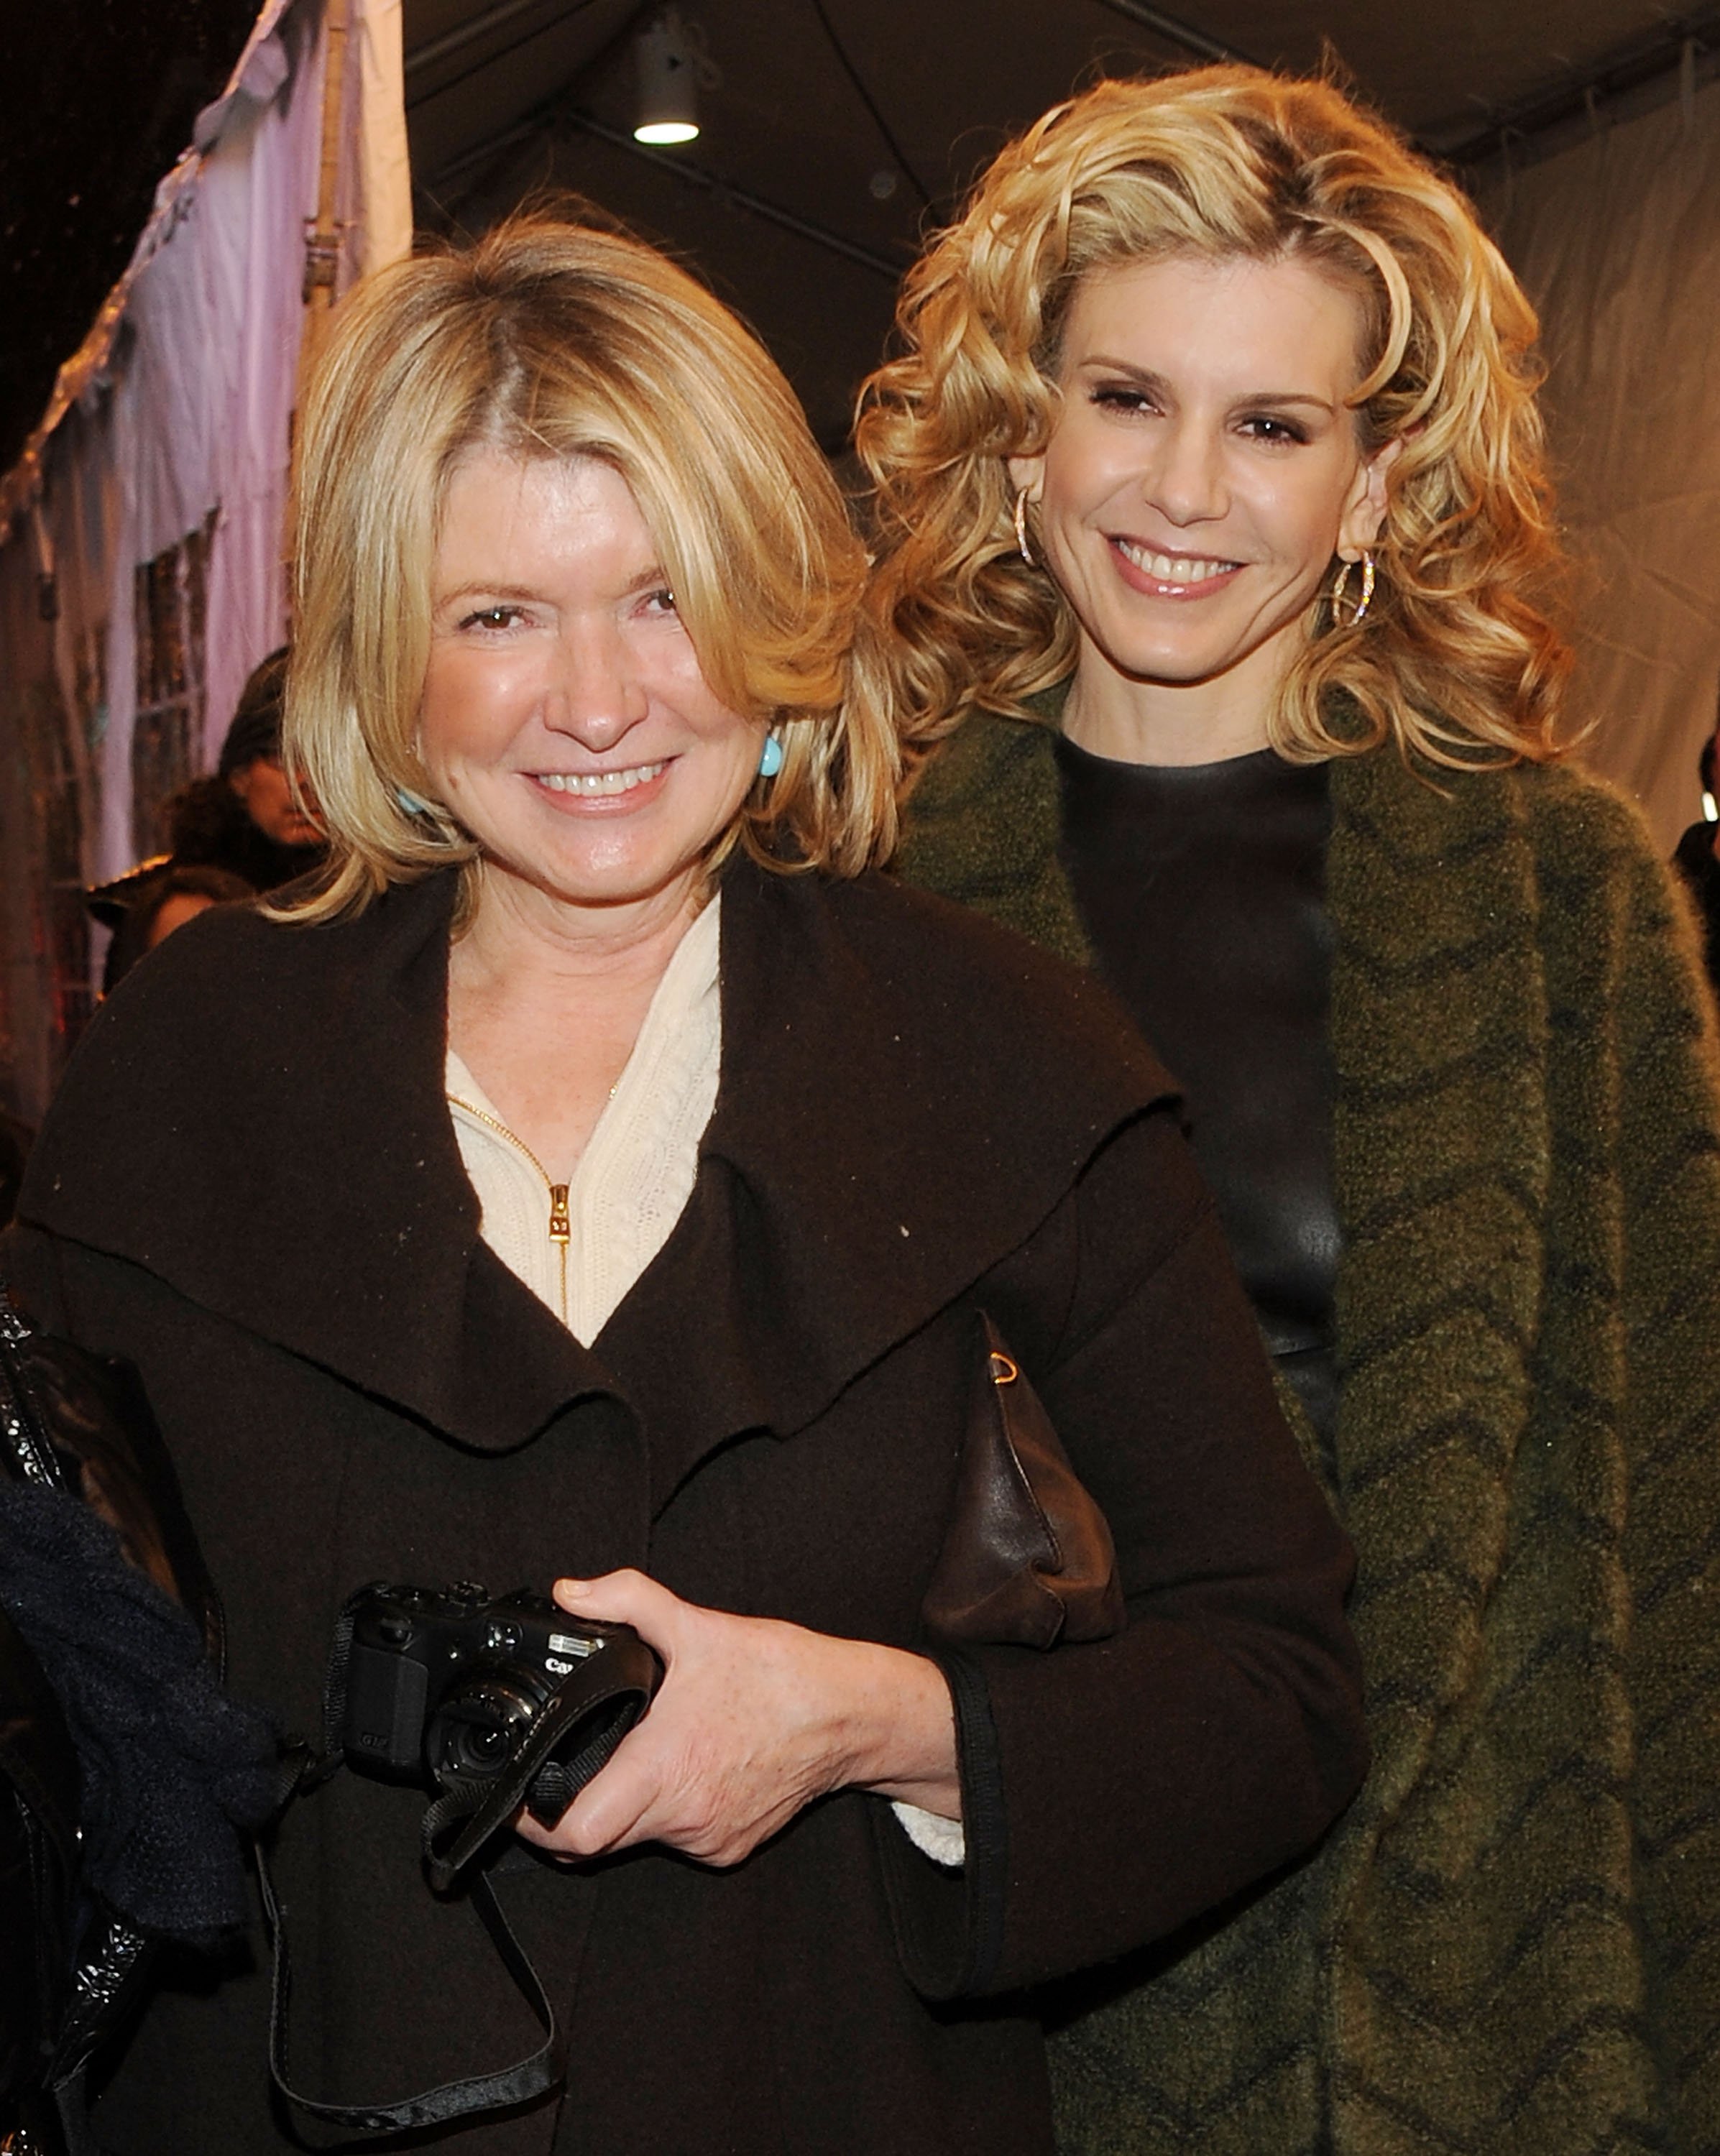  Martha Stewart and Alexis Stewart attend Paul McCartney plays World Famous Apollo Theater for first time, celebrating 20 Million Sirius XM Subscribers at The Apollo Theater on December 13, 2010 in New York City. | Source: Getty Images